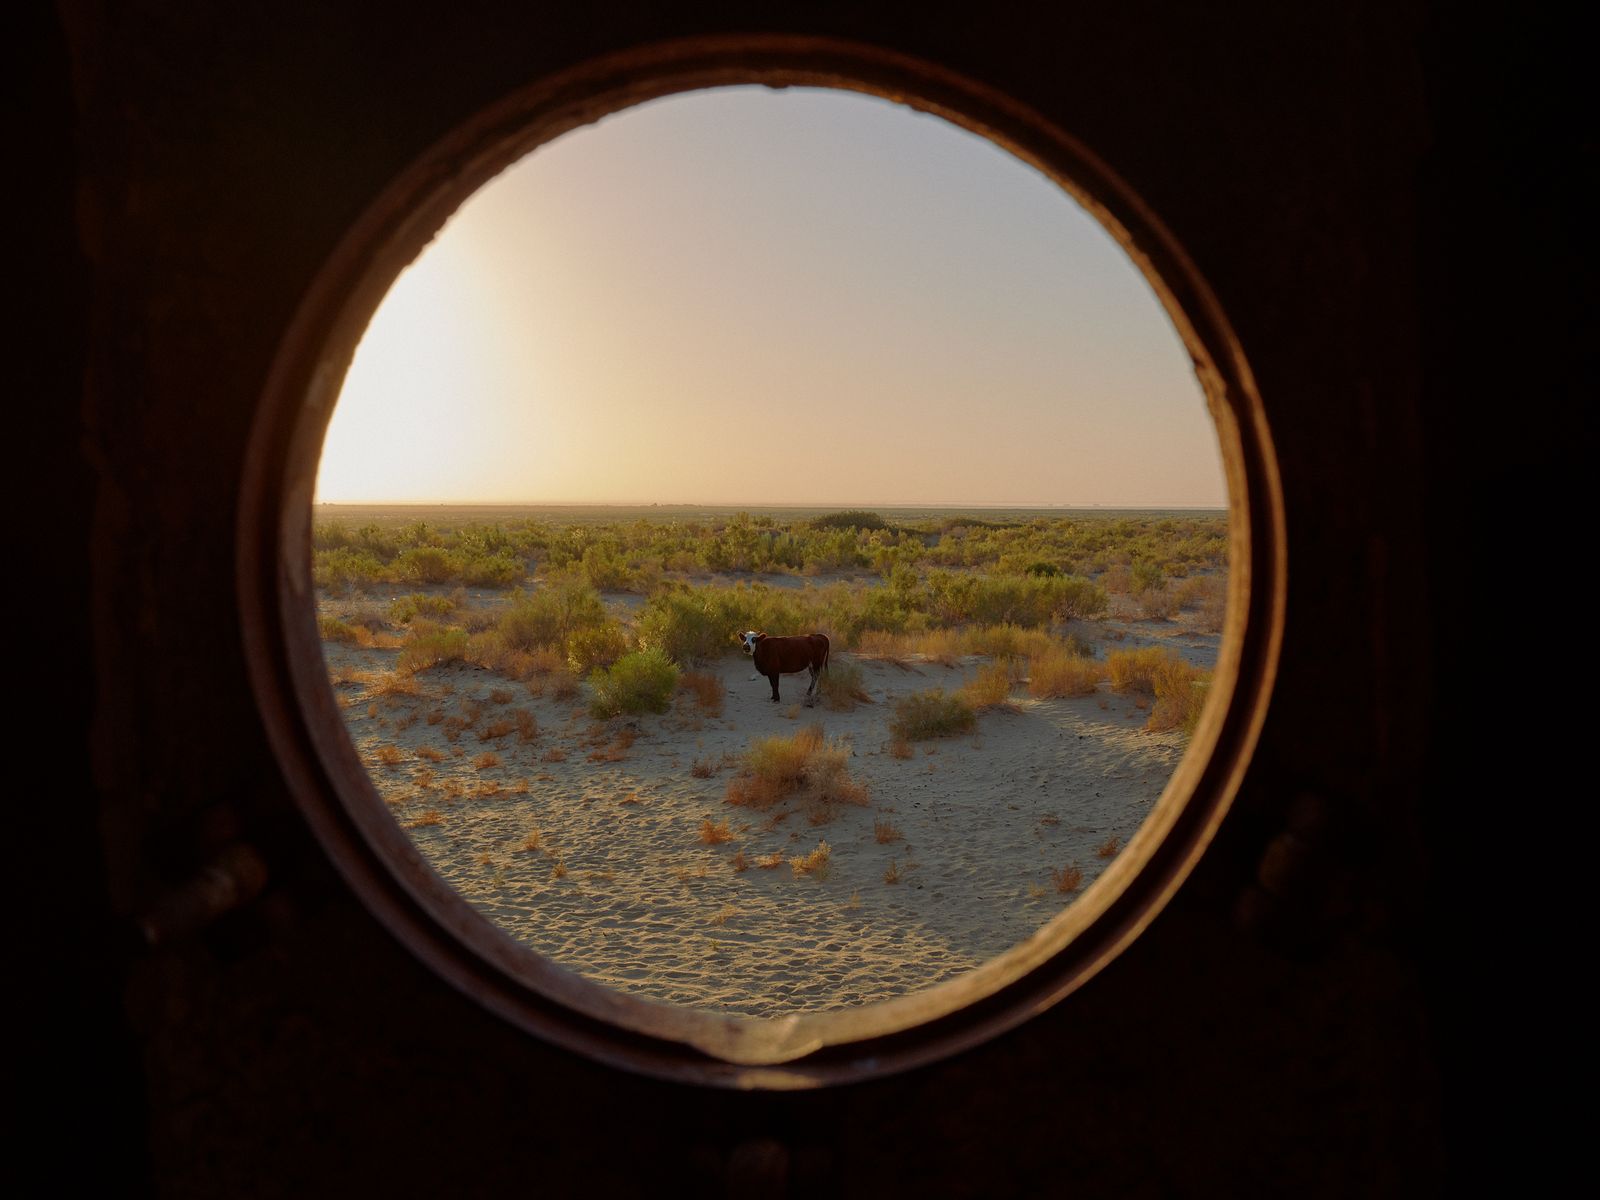 © Kristina Varaksina - Looking out of a shipwreck’s window. Only cattle now walk the deserted land.